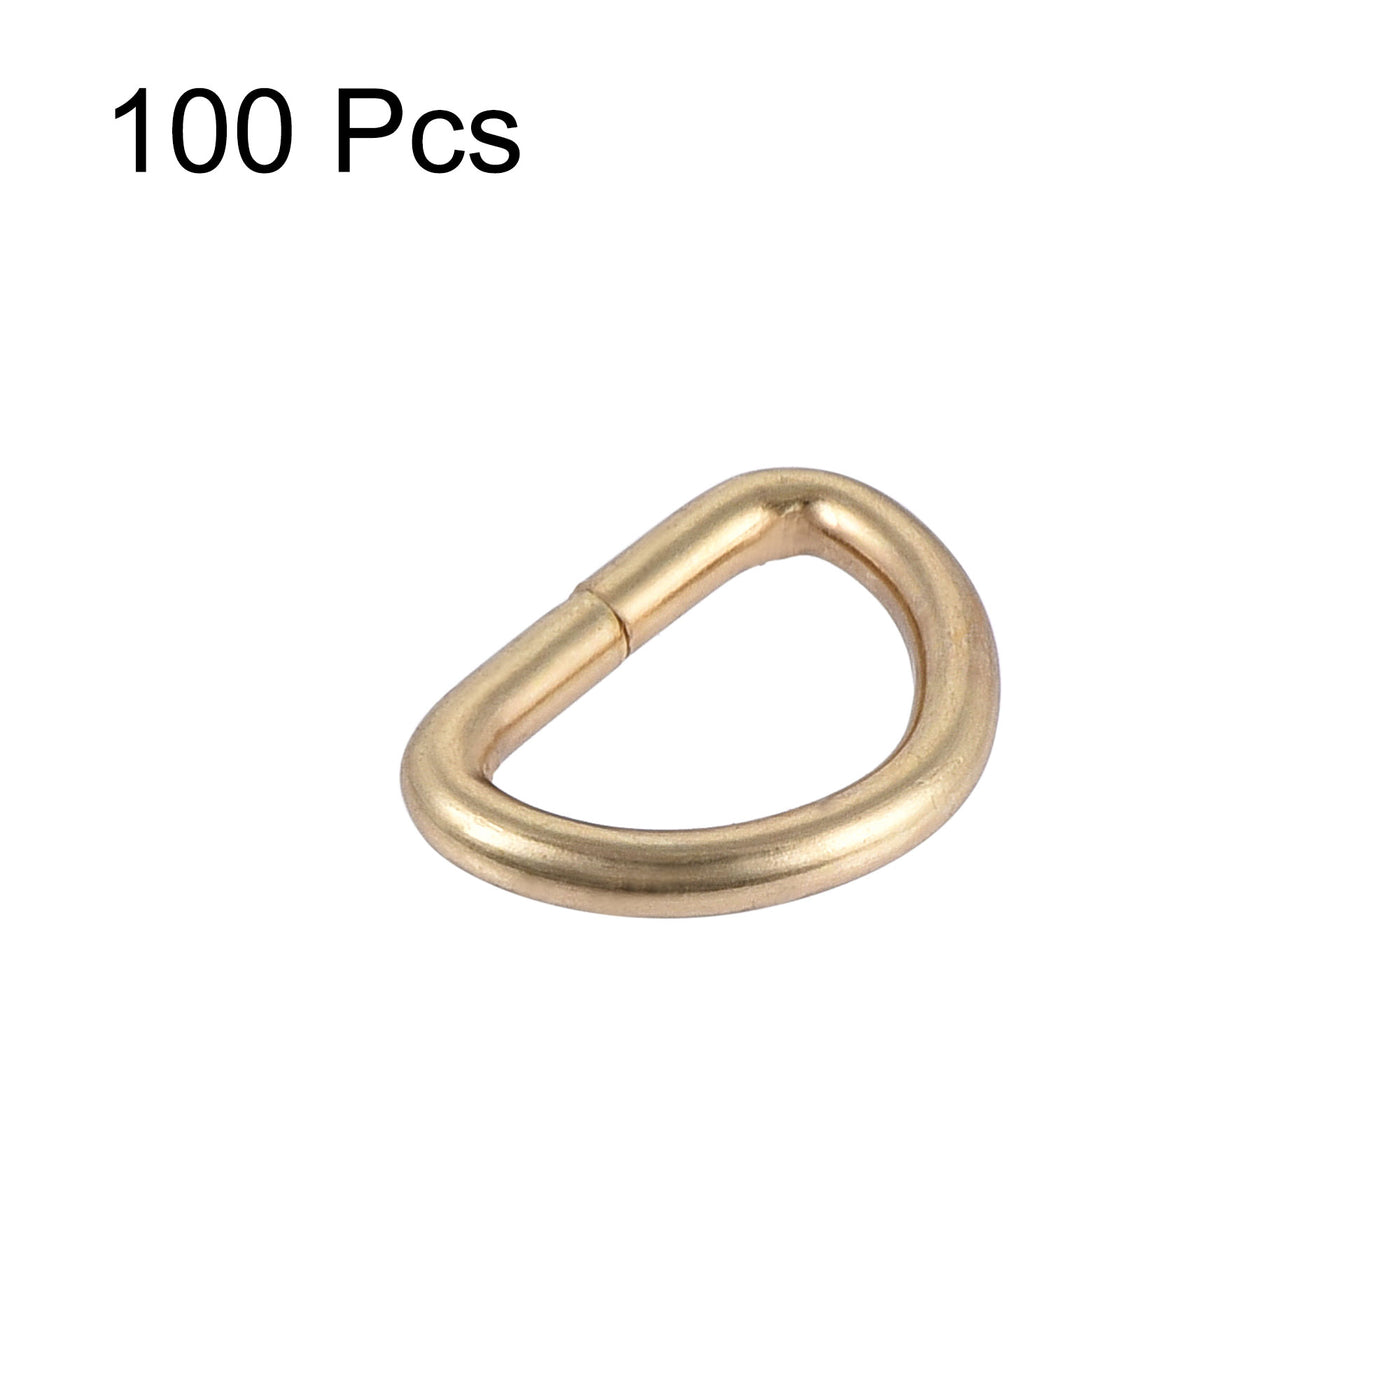 uxcell Uxcell Metal D Ring 0.39"(10mm) D-Rings Buckle for Hardware Bags Belts Craft DIY Accessories Gold Tone 100pcs